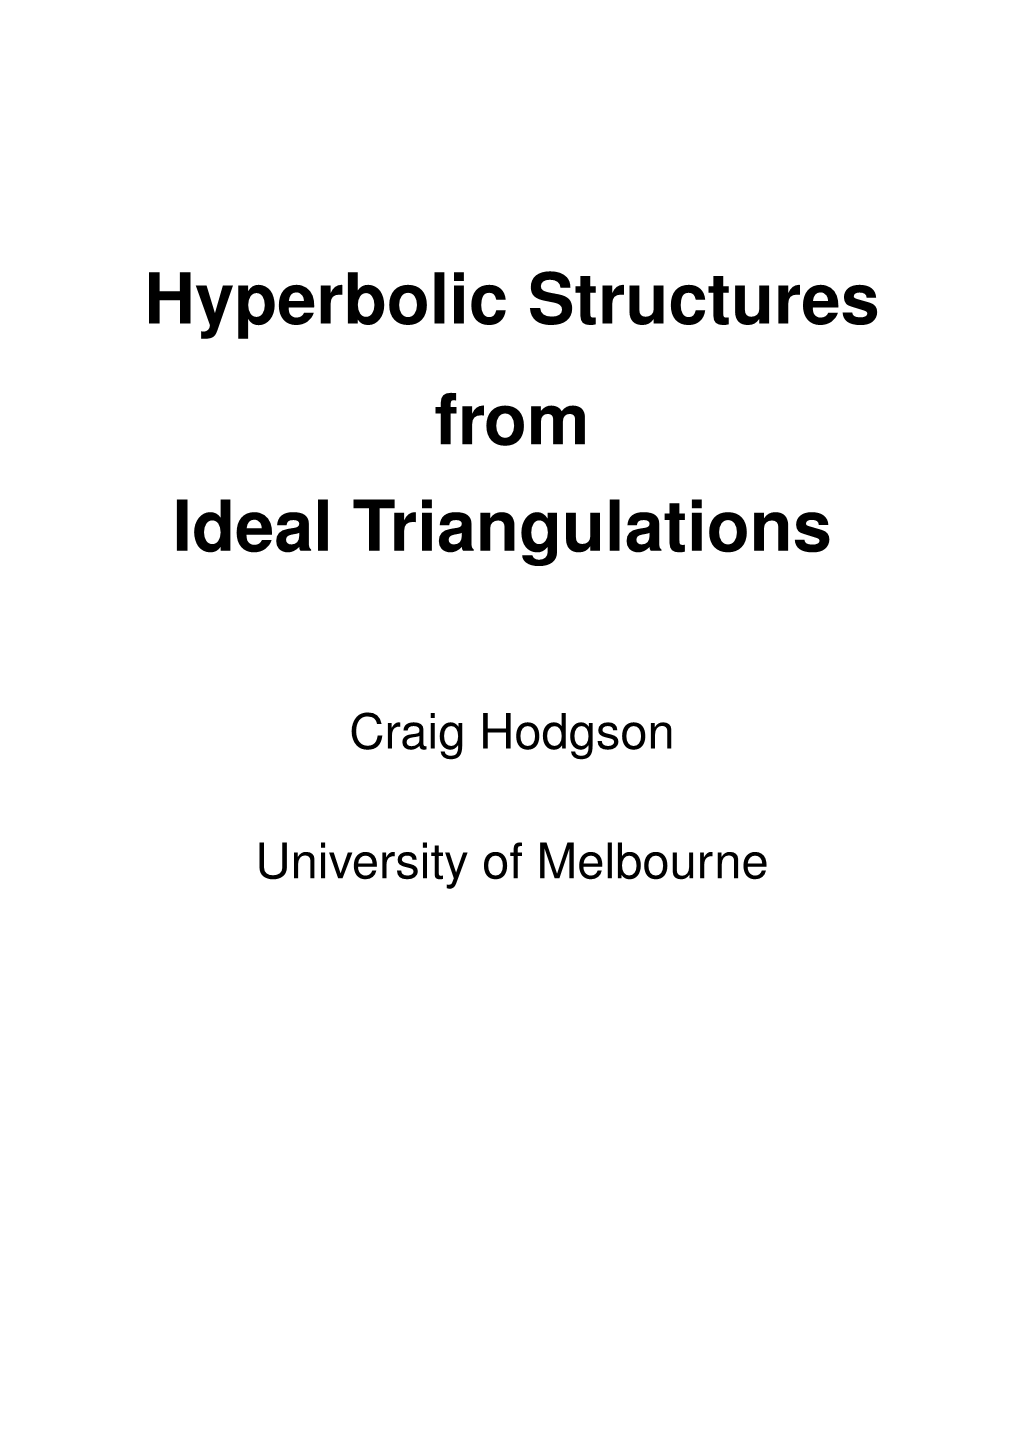 Hyperbolic Structures from Ideal Triangulations